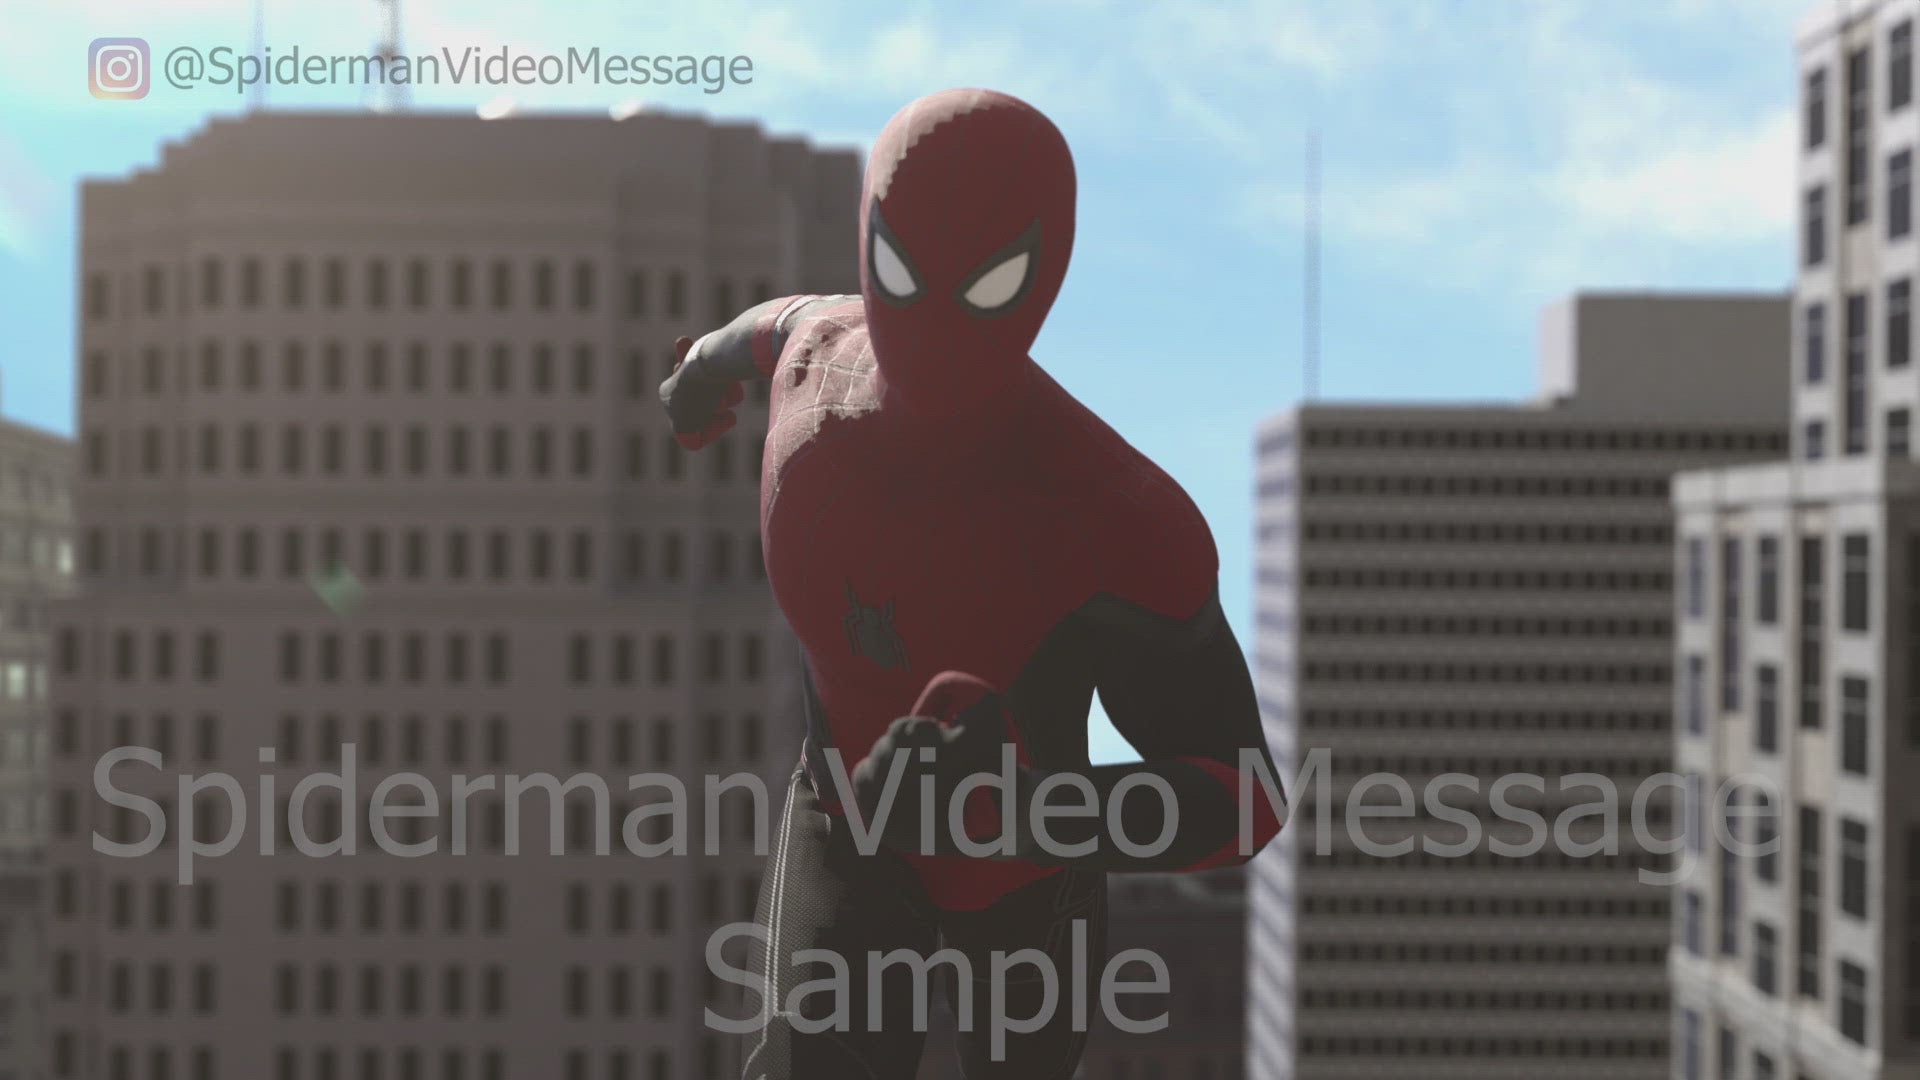 Spiderman Video Message. A perfect birthday gift for any superhero fans.